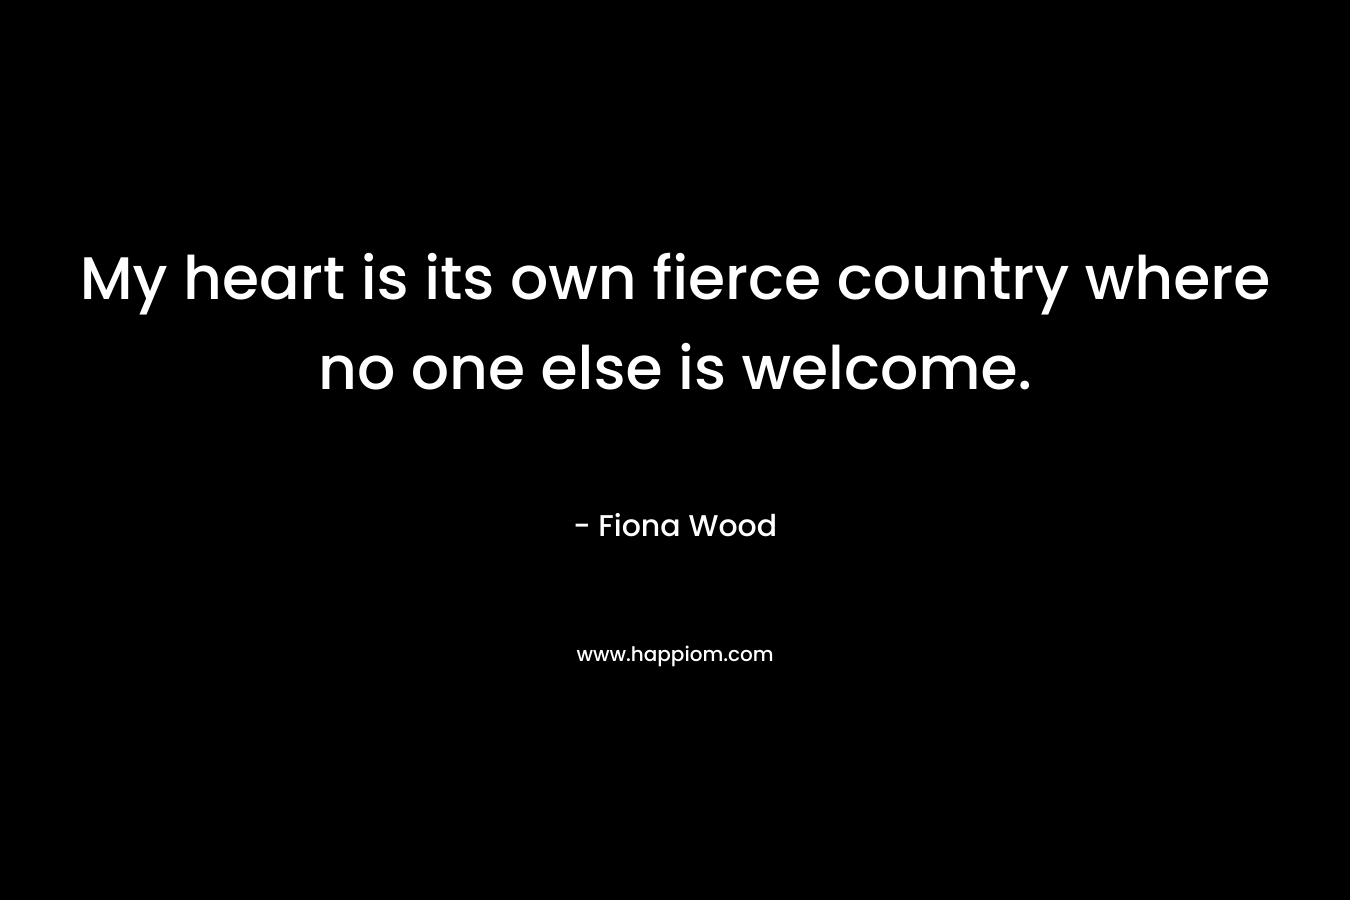 My heart is its own fierce country where no one else is welcome.